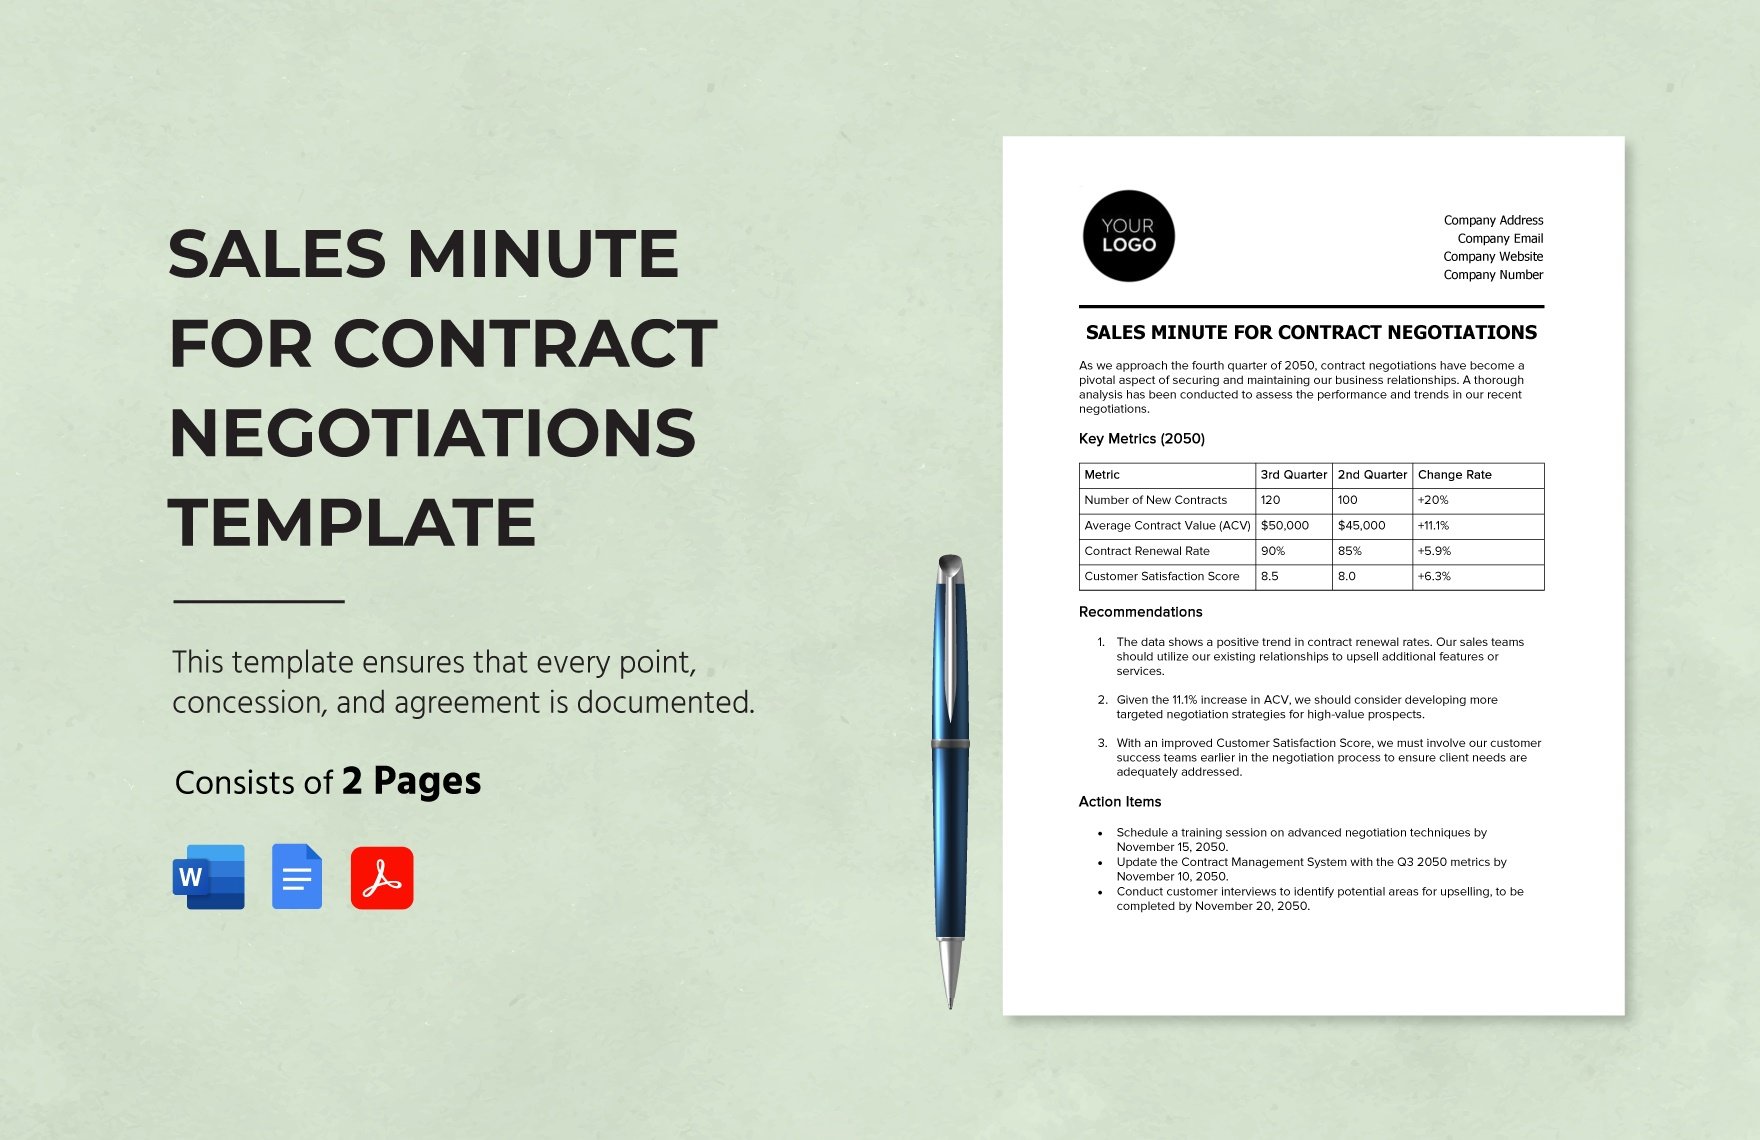 Sales Minute for Contract Negotiations Template